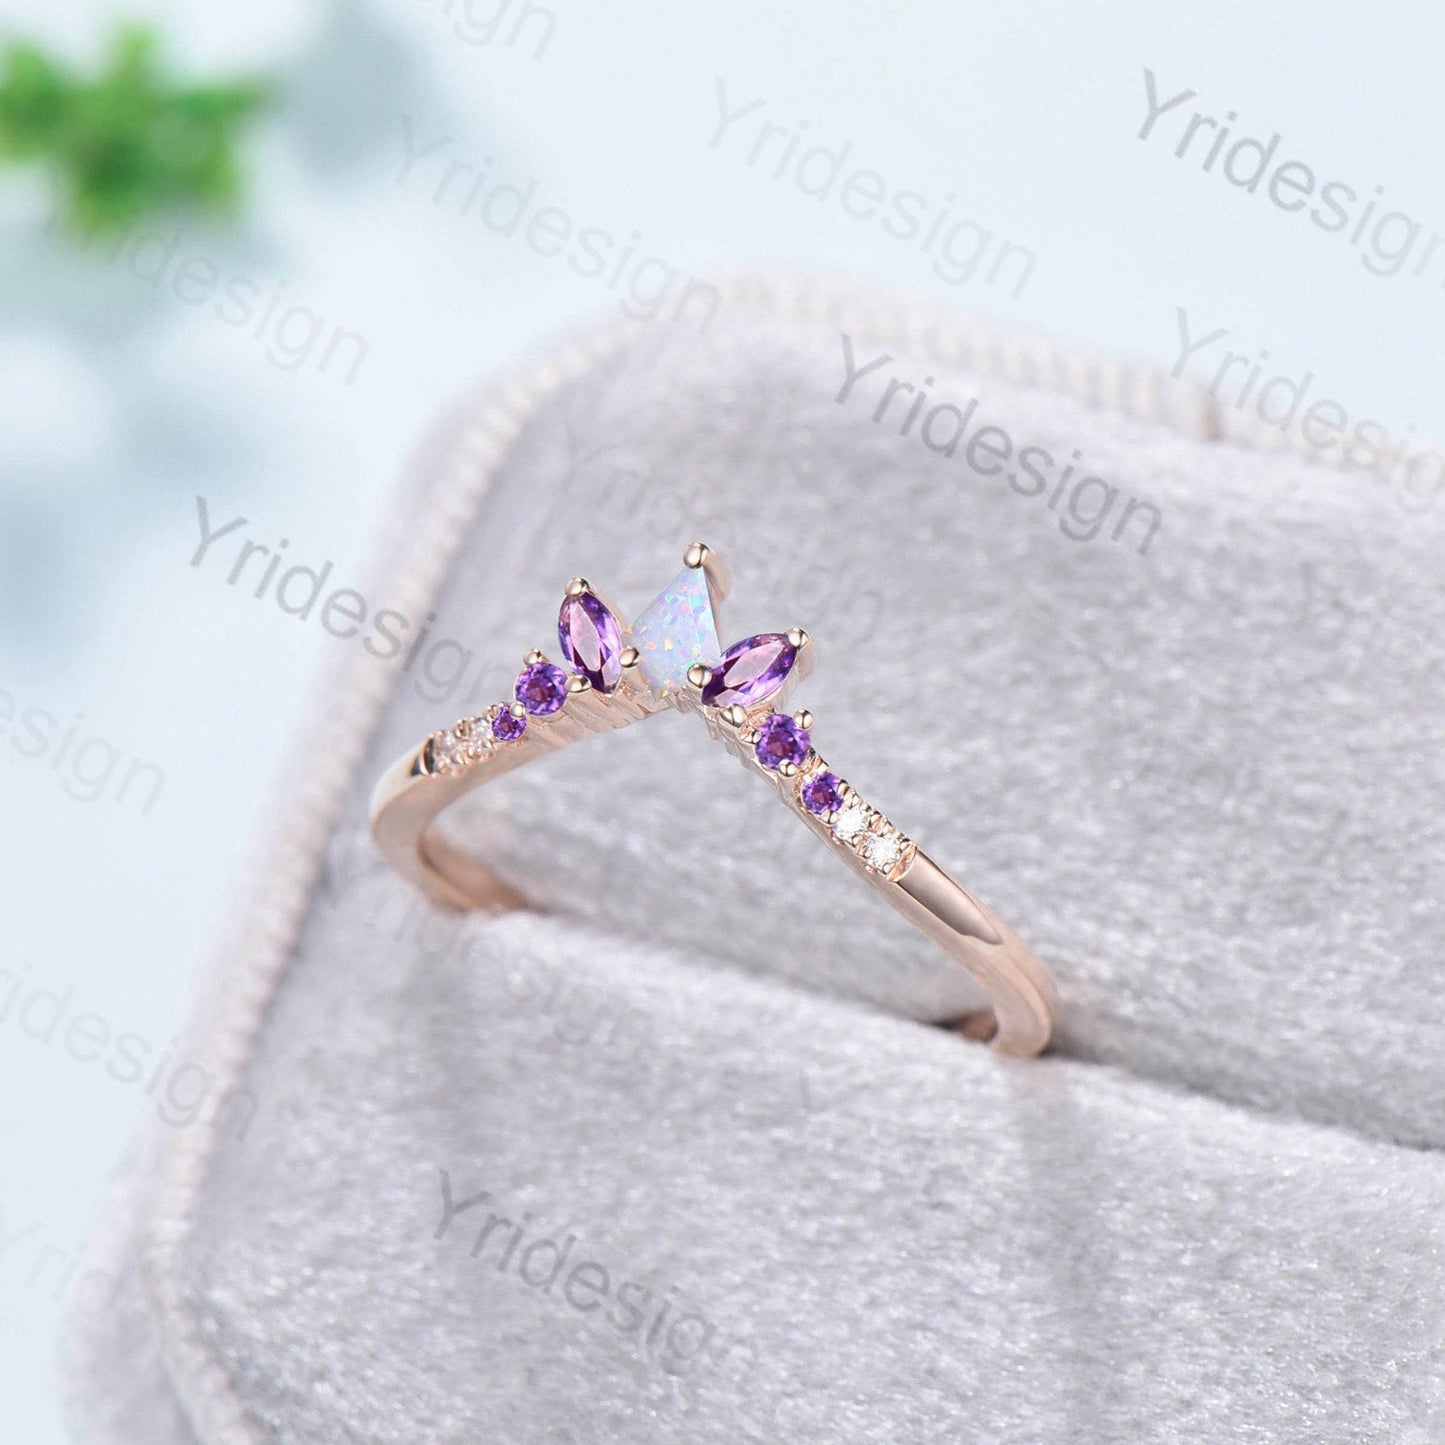 Vintage Fire Opal Amethyst Eternity Wedding Band Women Unique Kite Cut Opal Stackable Ring Marquise Amethyst Matching Band Anniversary Gift - PENFINE